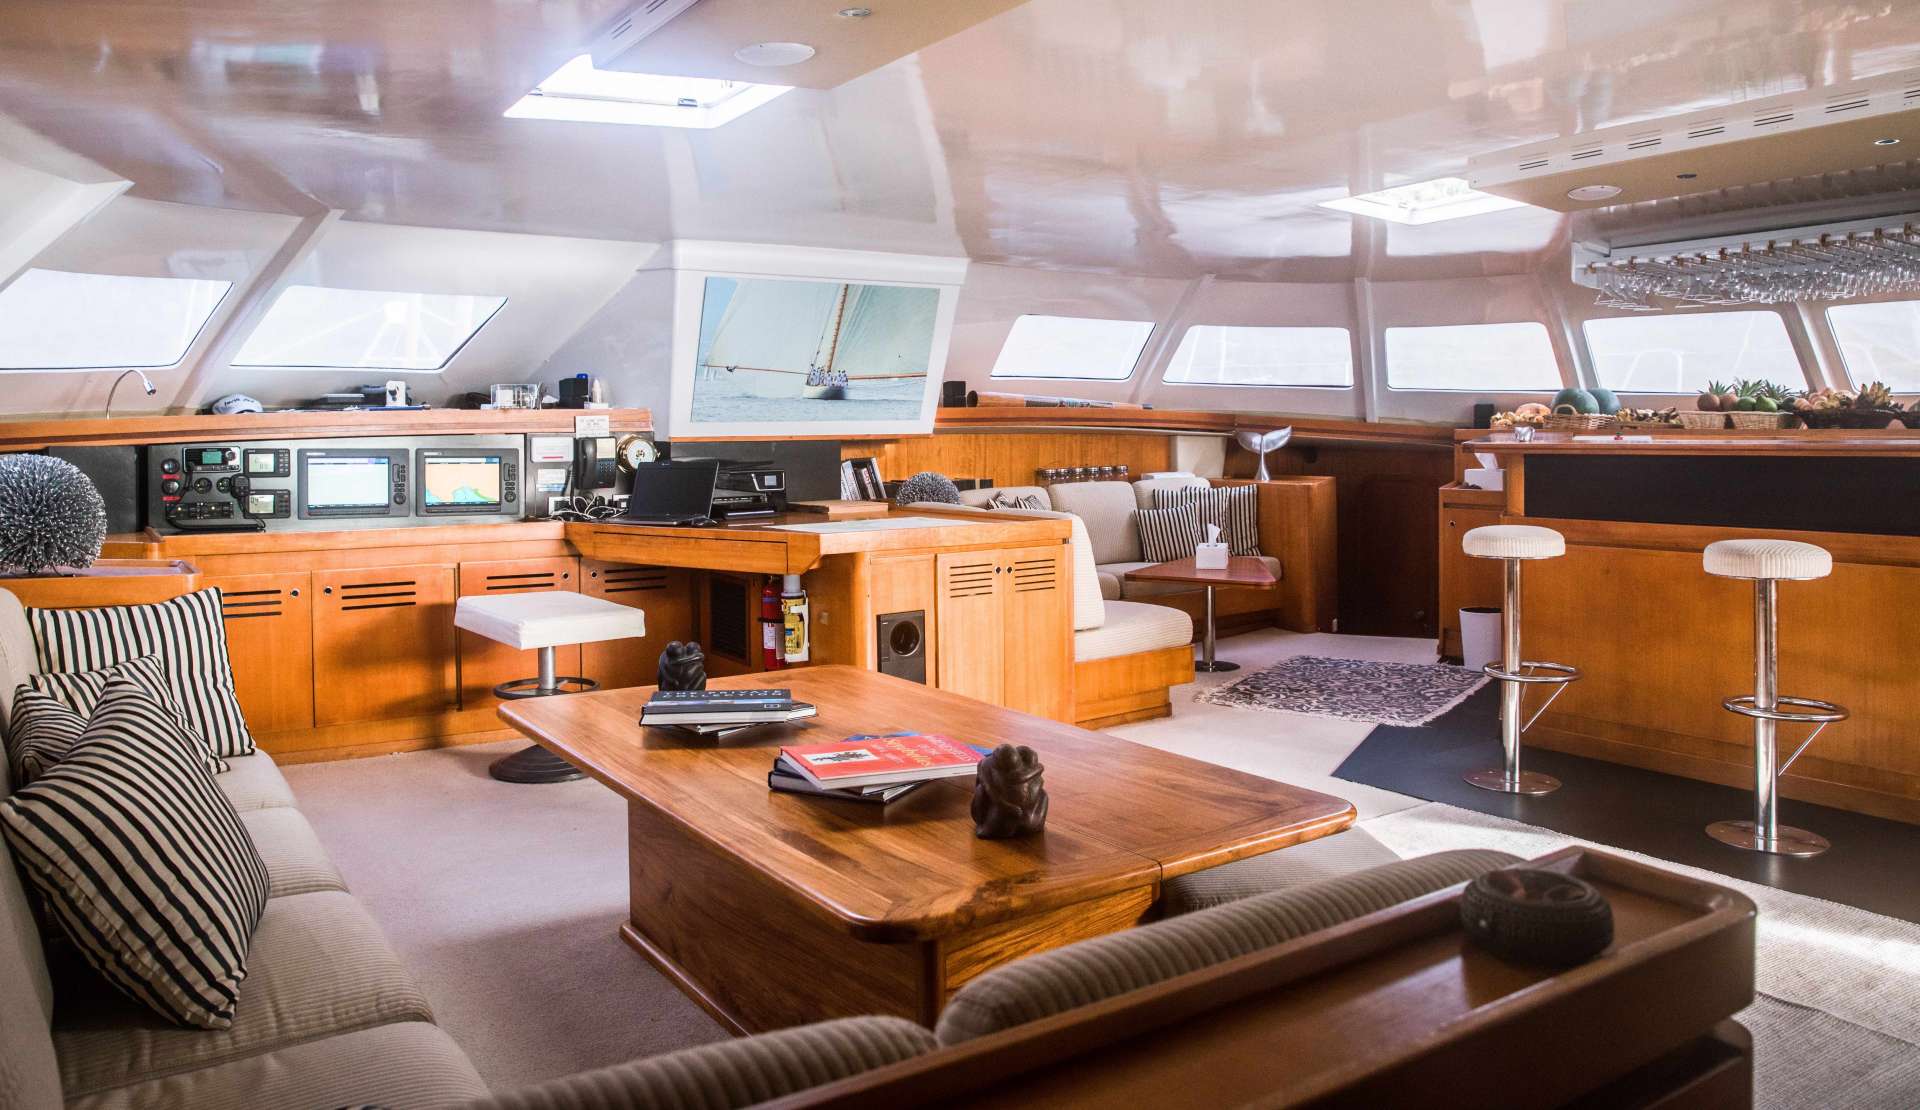 LONESTAR Yacht Charter - Salon with inviting bar and seating for entertainment and relaxation